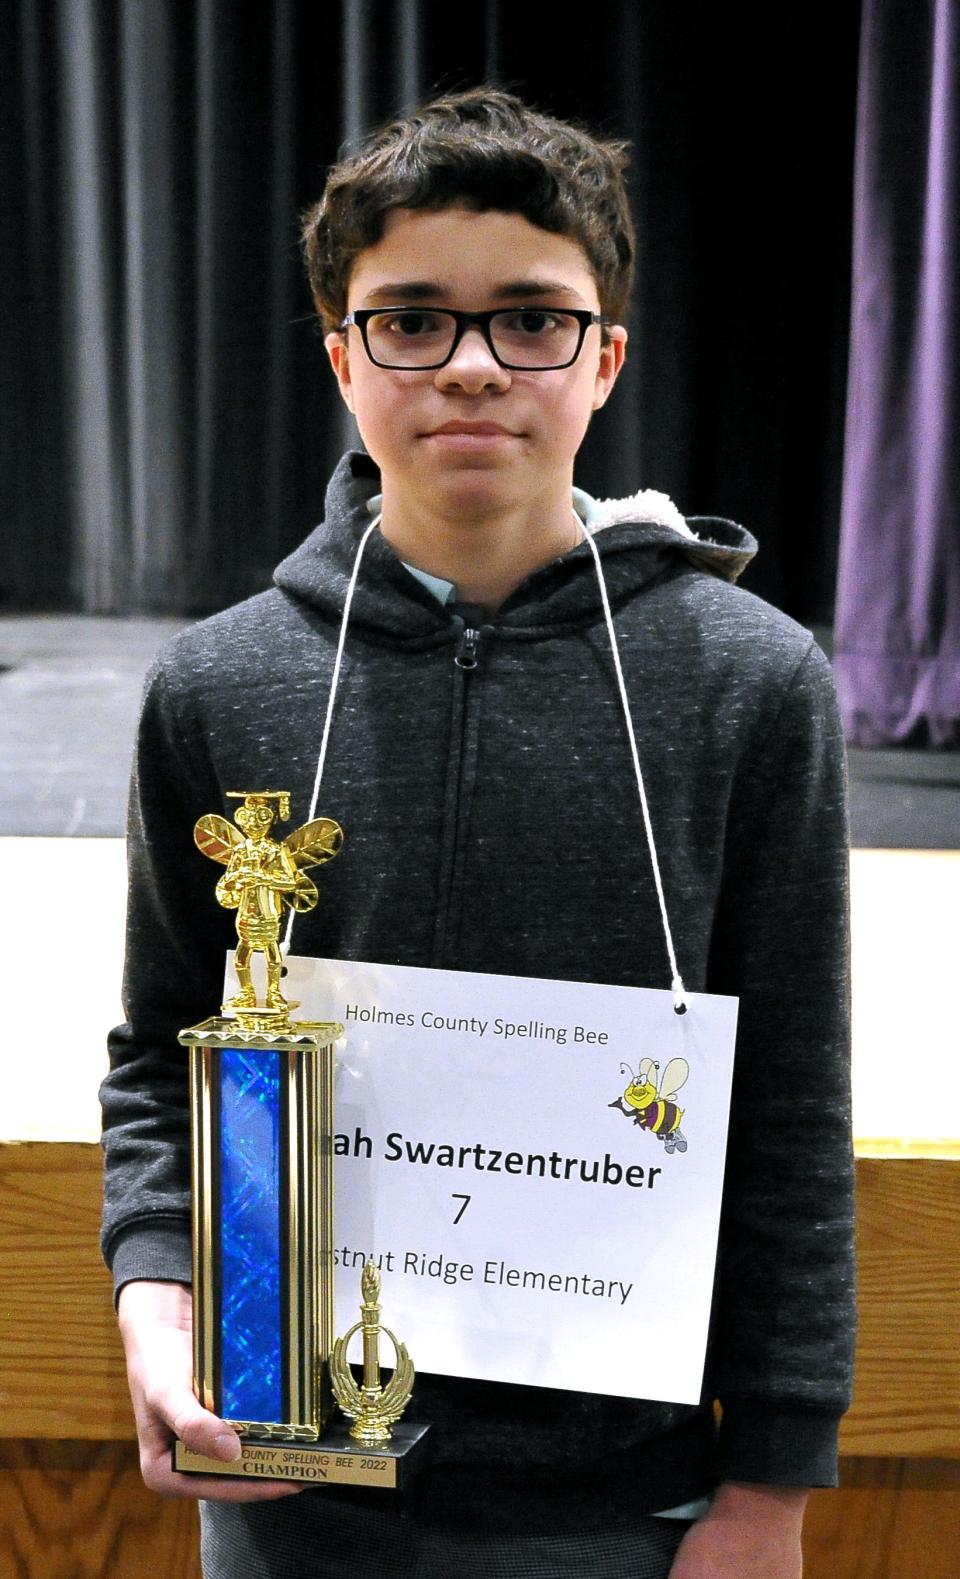 Isaiah Swartzentruber, a Chestnut Ridge seventh grader, correctly spells the word "repercussion" to win Thursday night's Holmes County Spelling Bee.